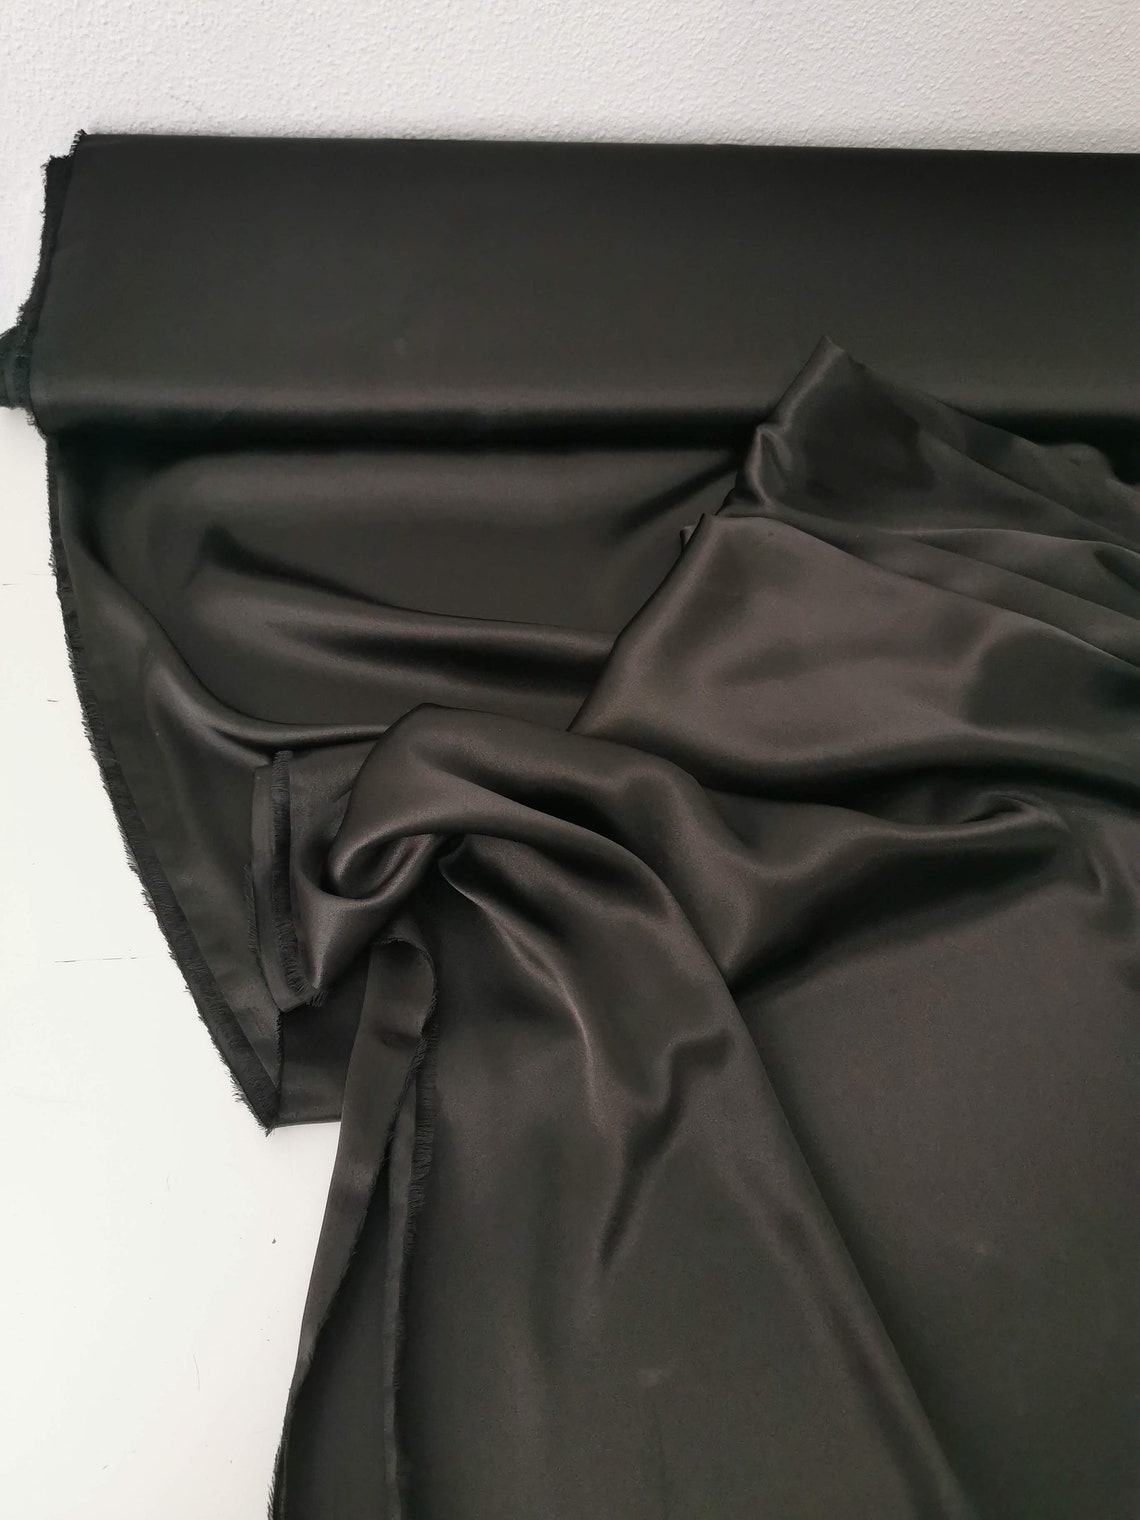 Black polyester satin fabric for lingerie. Black artificial | Etsy